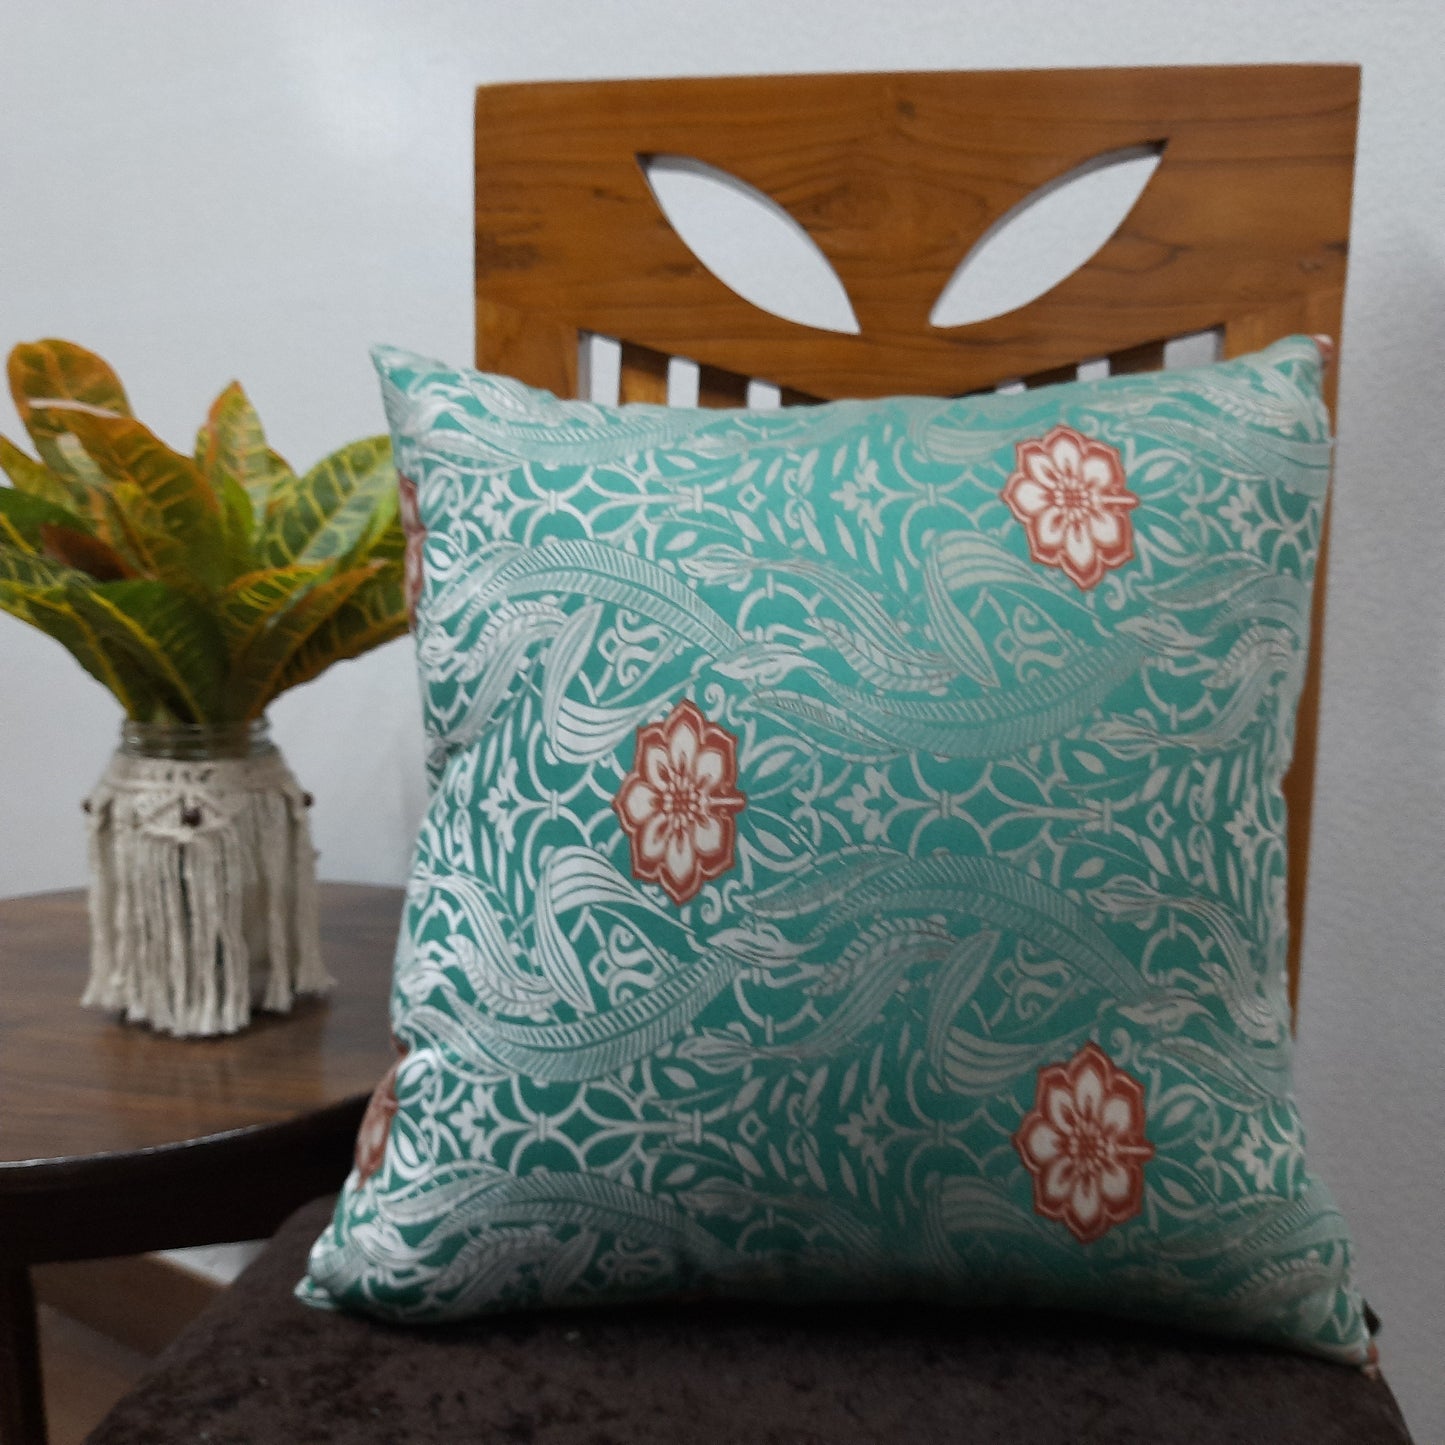 Riviera Collection-Cushion Covers In Glace Cotton For Regular Use –Sea-Green Ethnic Design– Best Price 40cm x 40cm (~16″ x 16″) – Set of 5